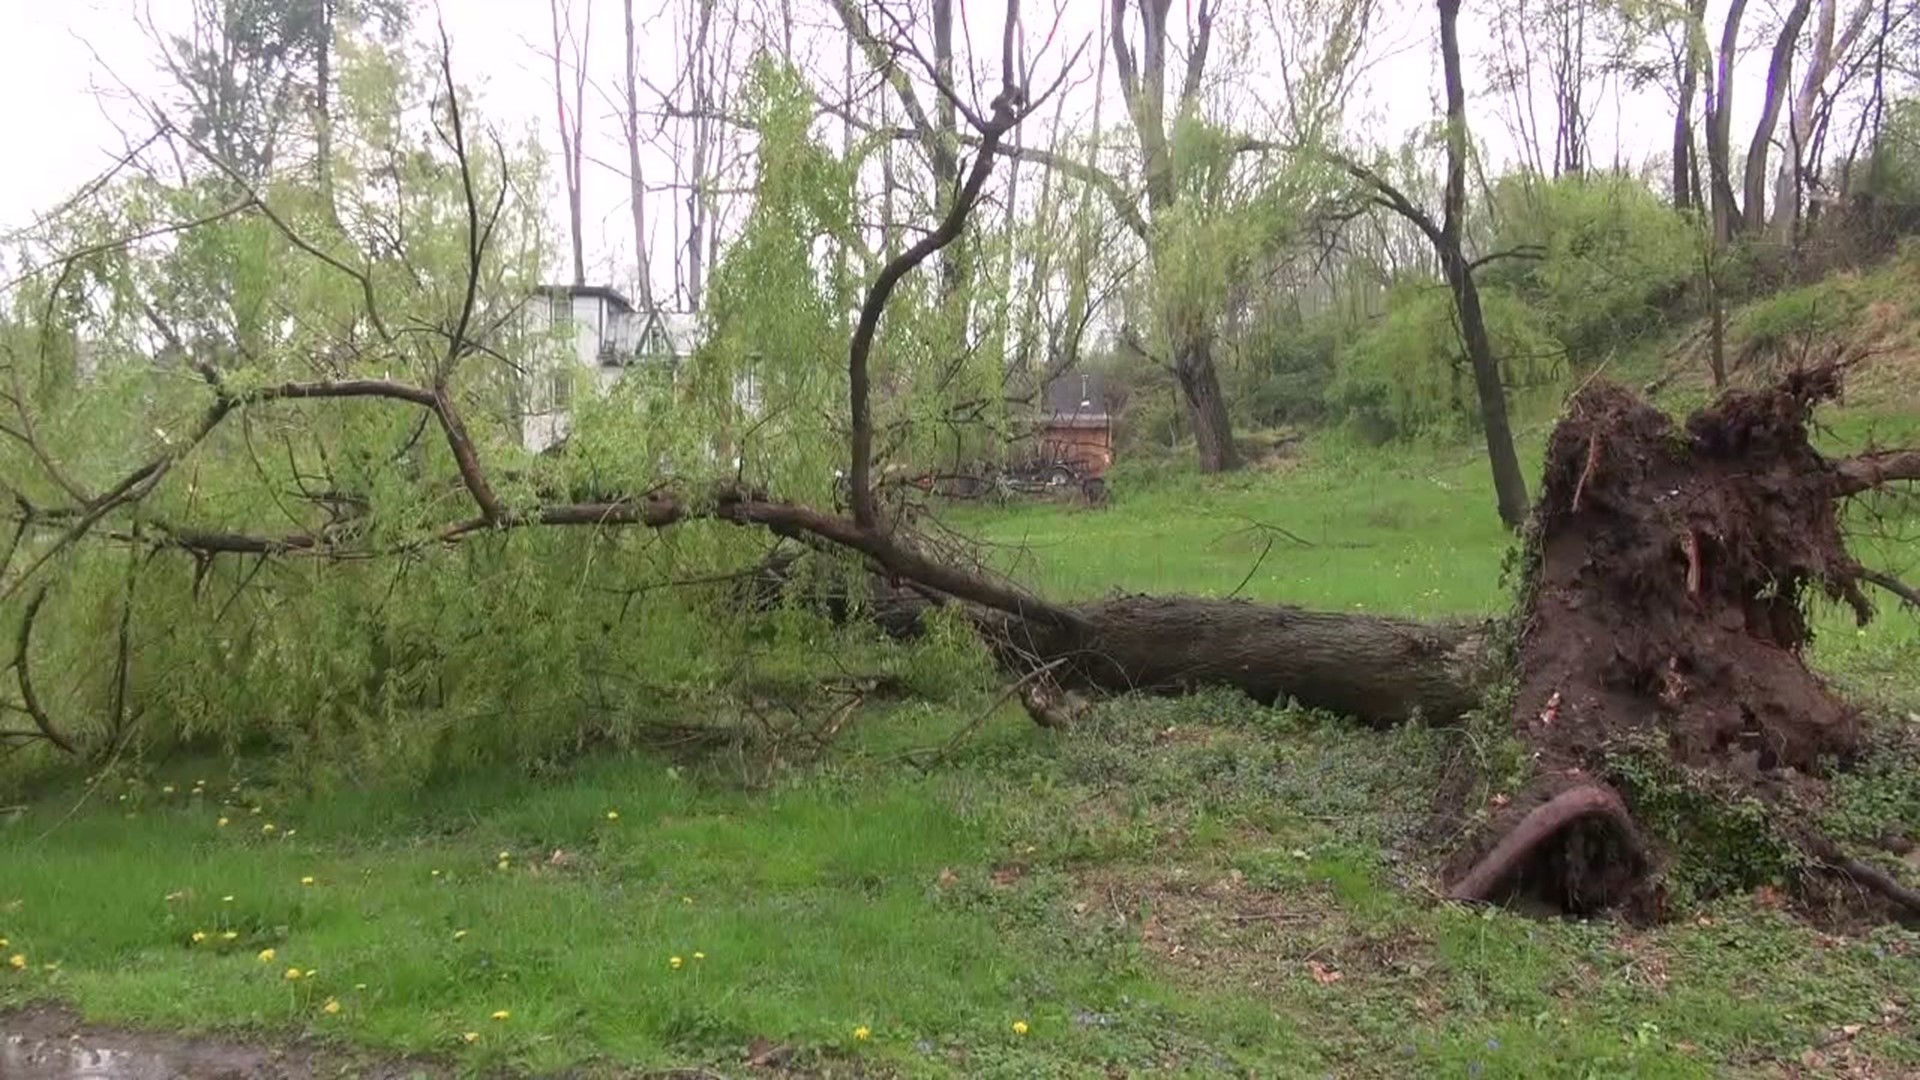 Folks are dealing with damage after storms blew through the area Wednesday night.